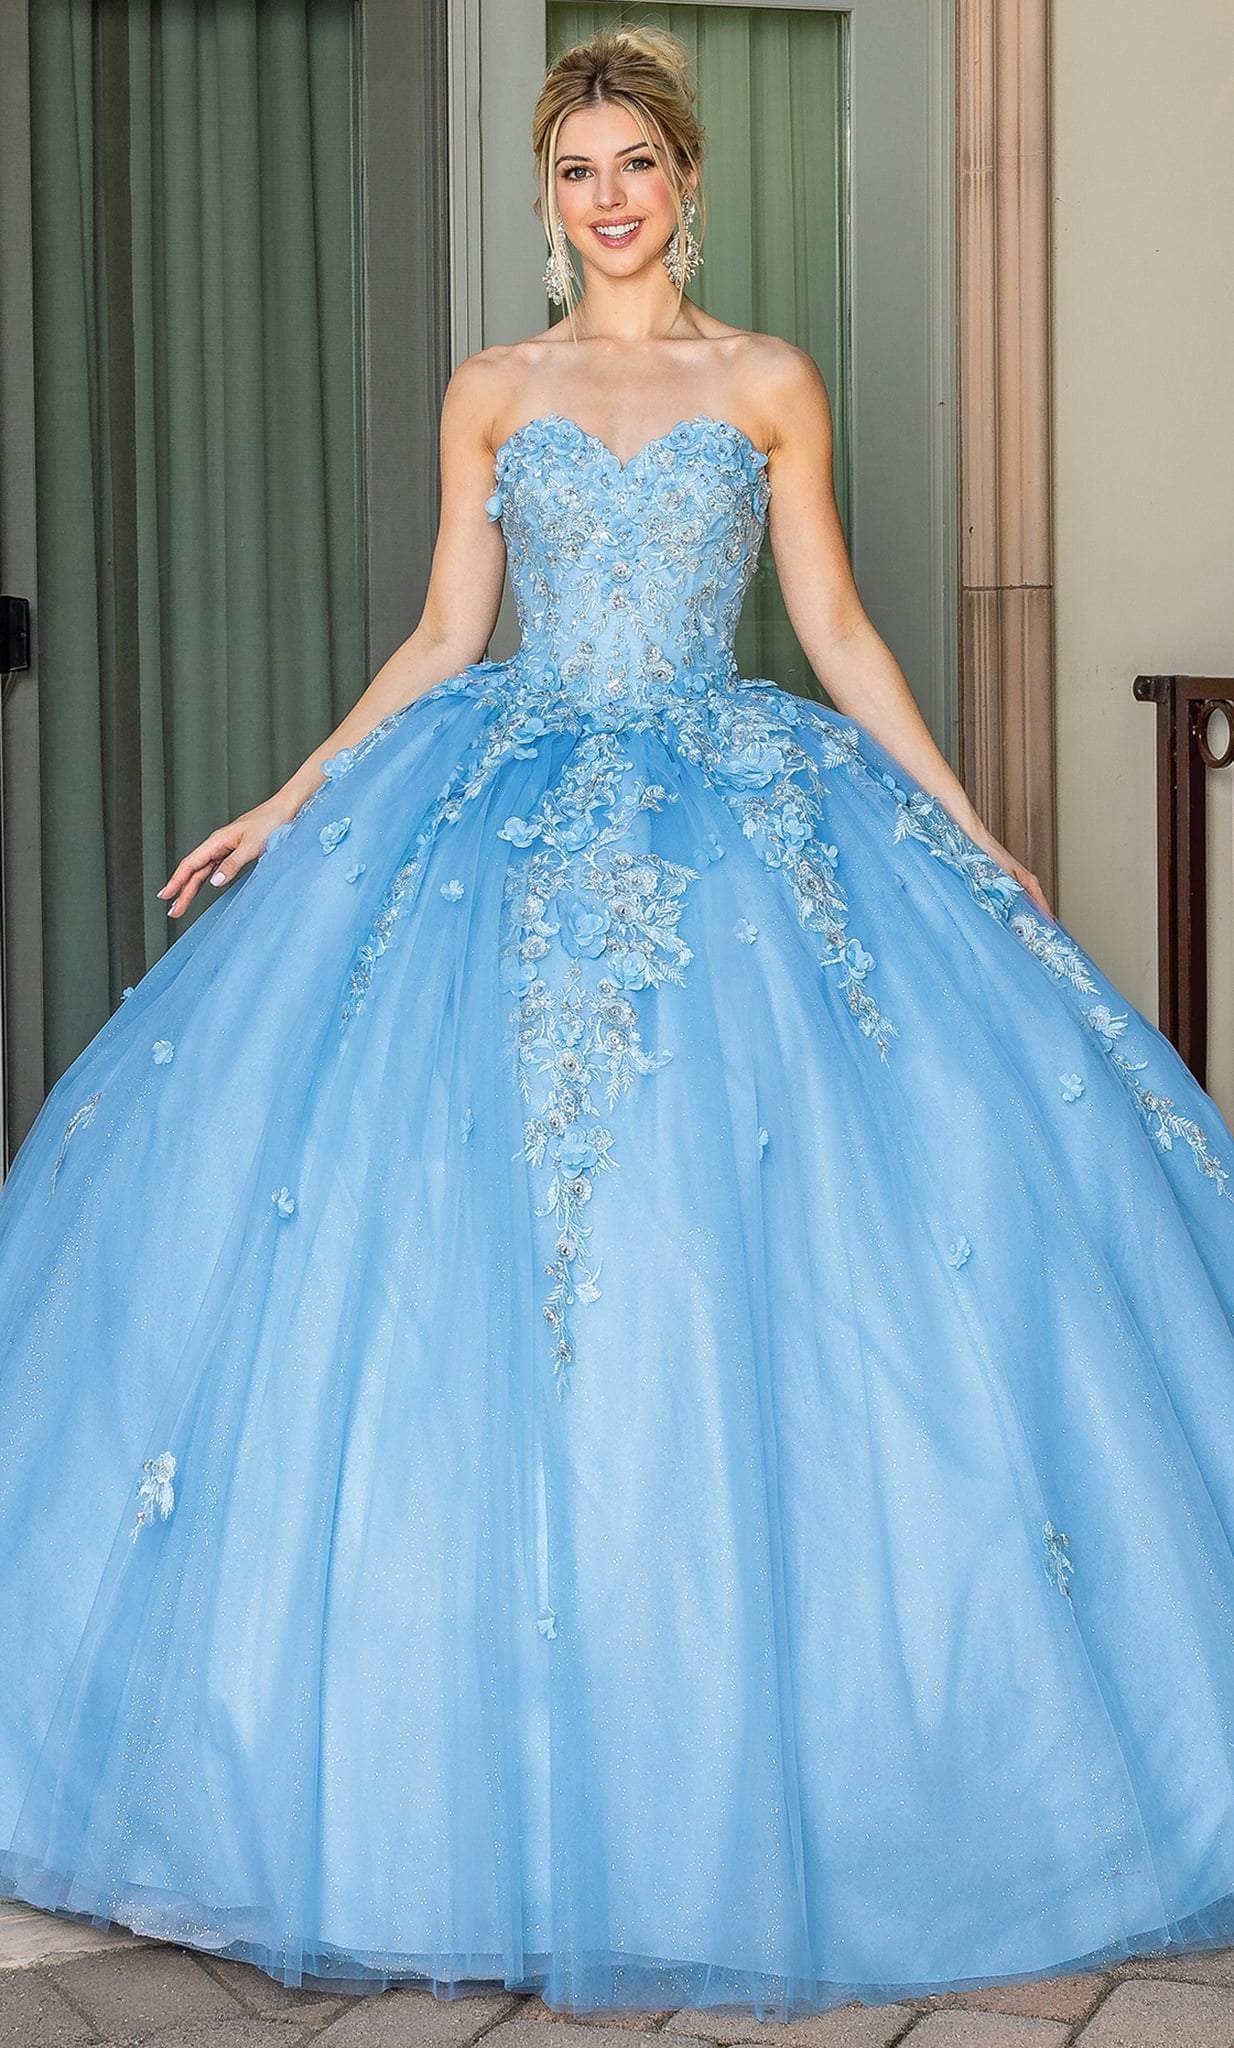 Image of Dancing Queen 1717 - Sweetheart Lace-Up Back Ballgown